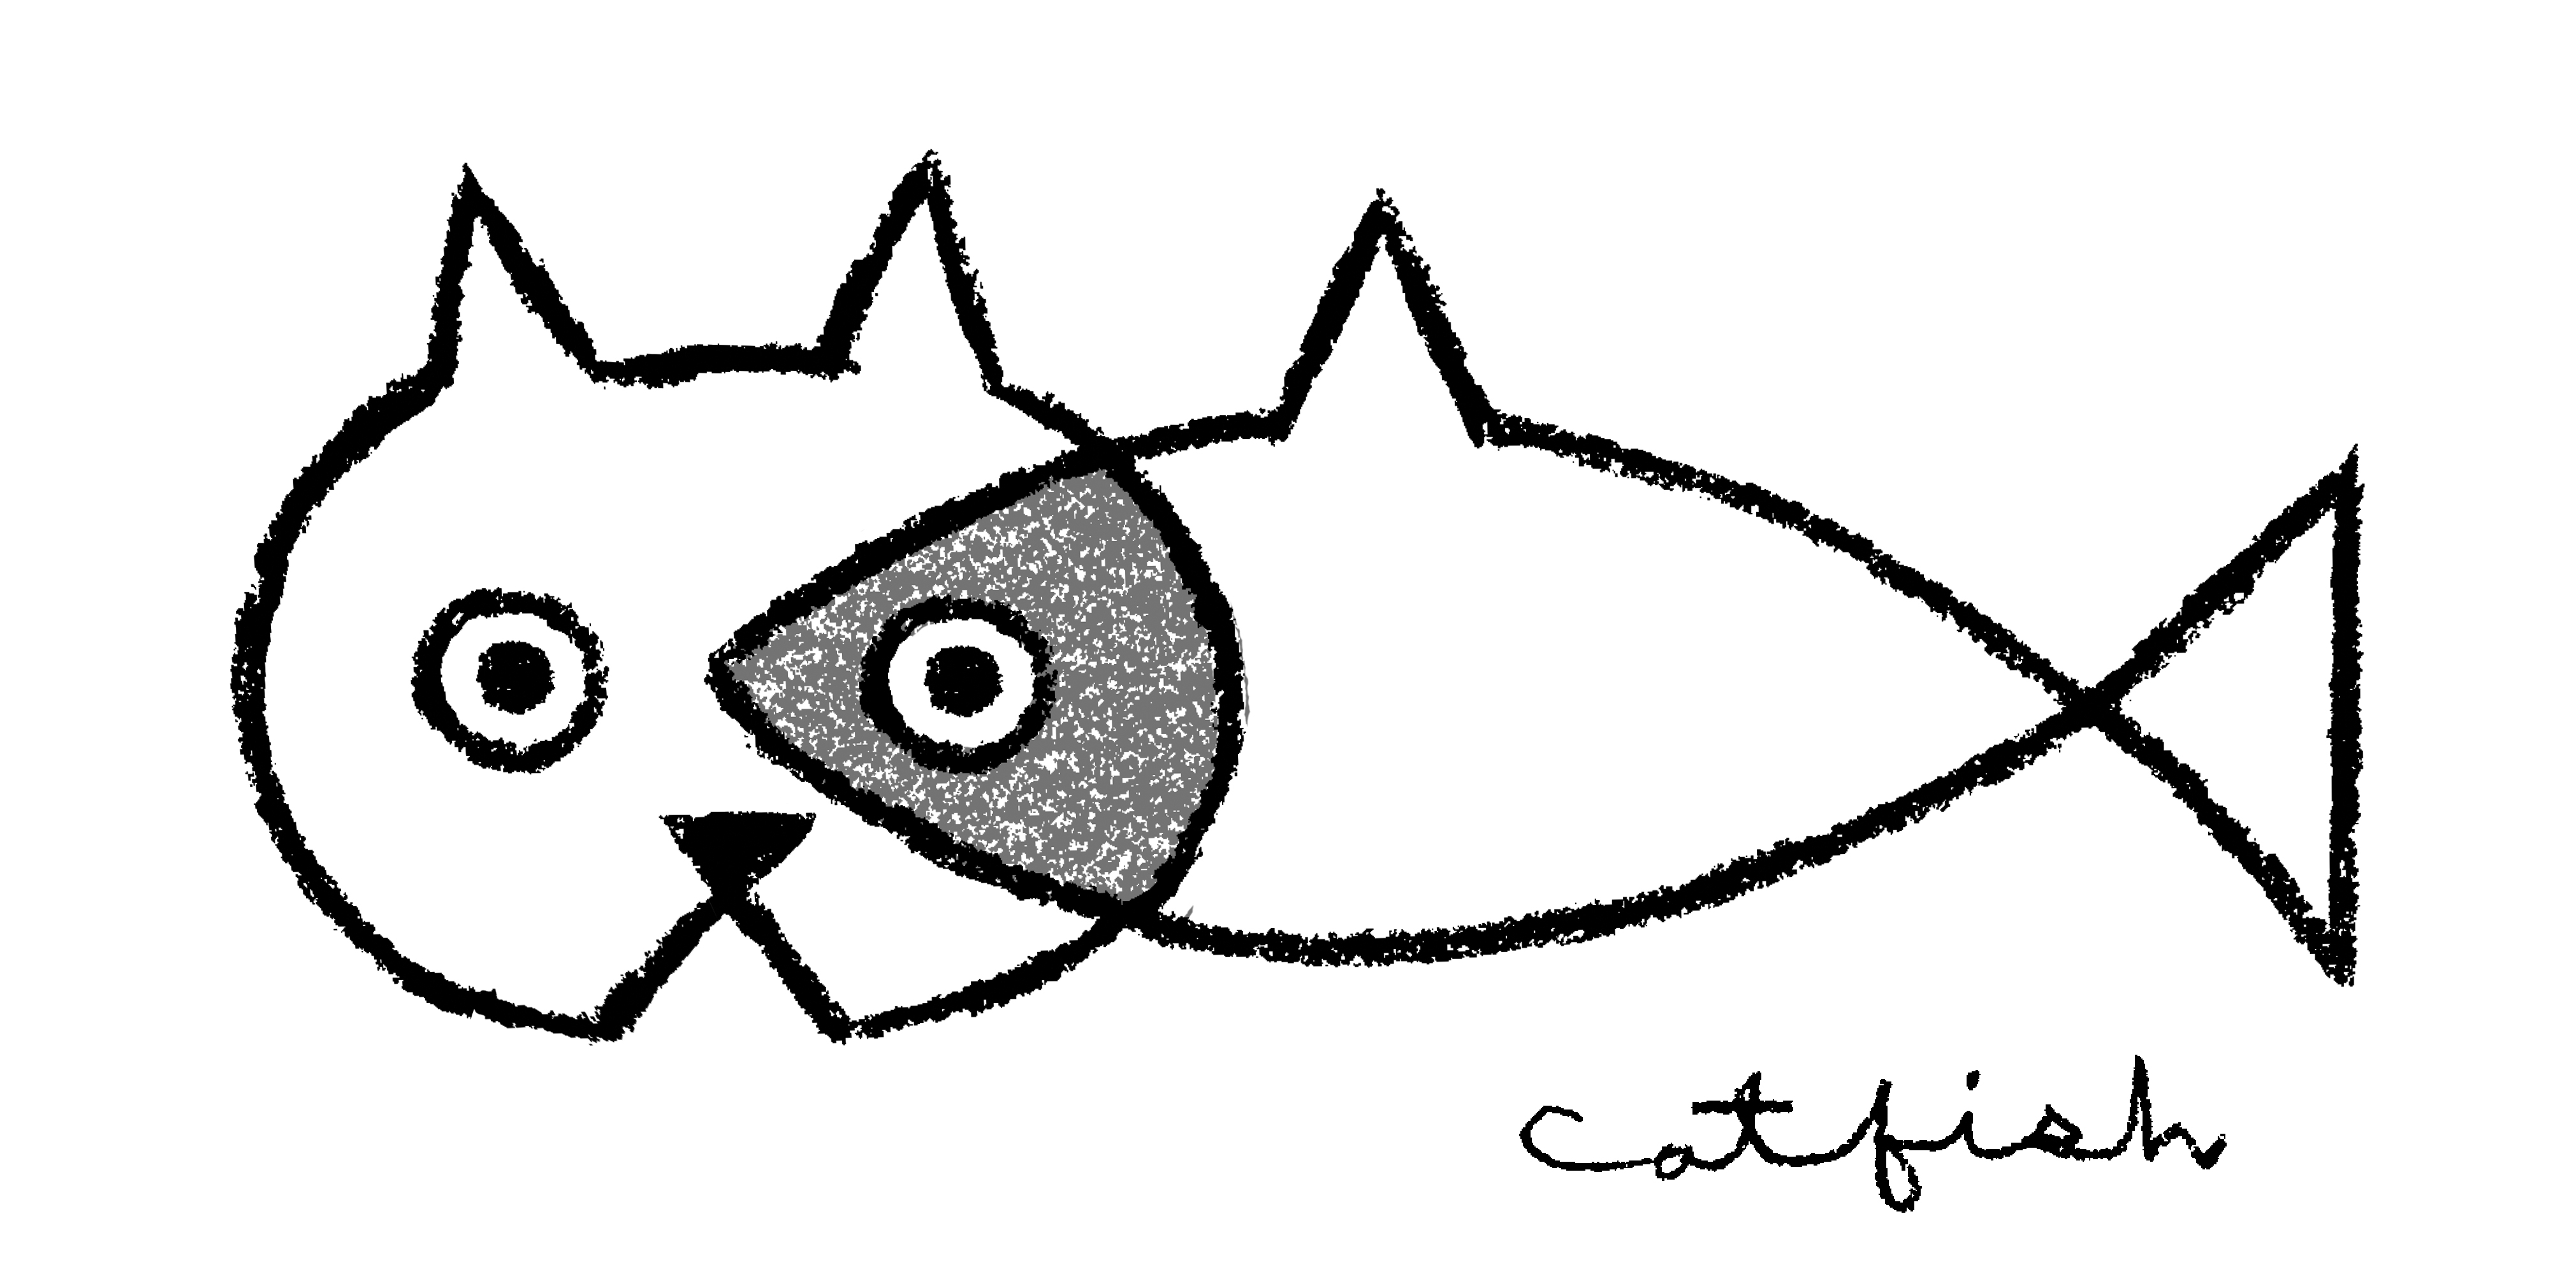 Drawings Of Catfish | Free Download Clip Art | Free Clip Art | on ...